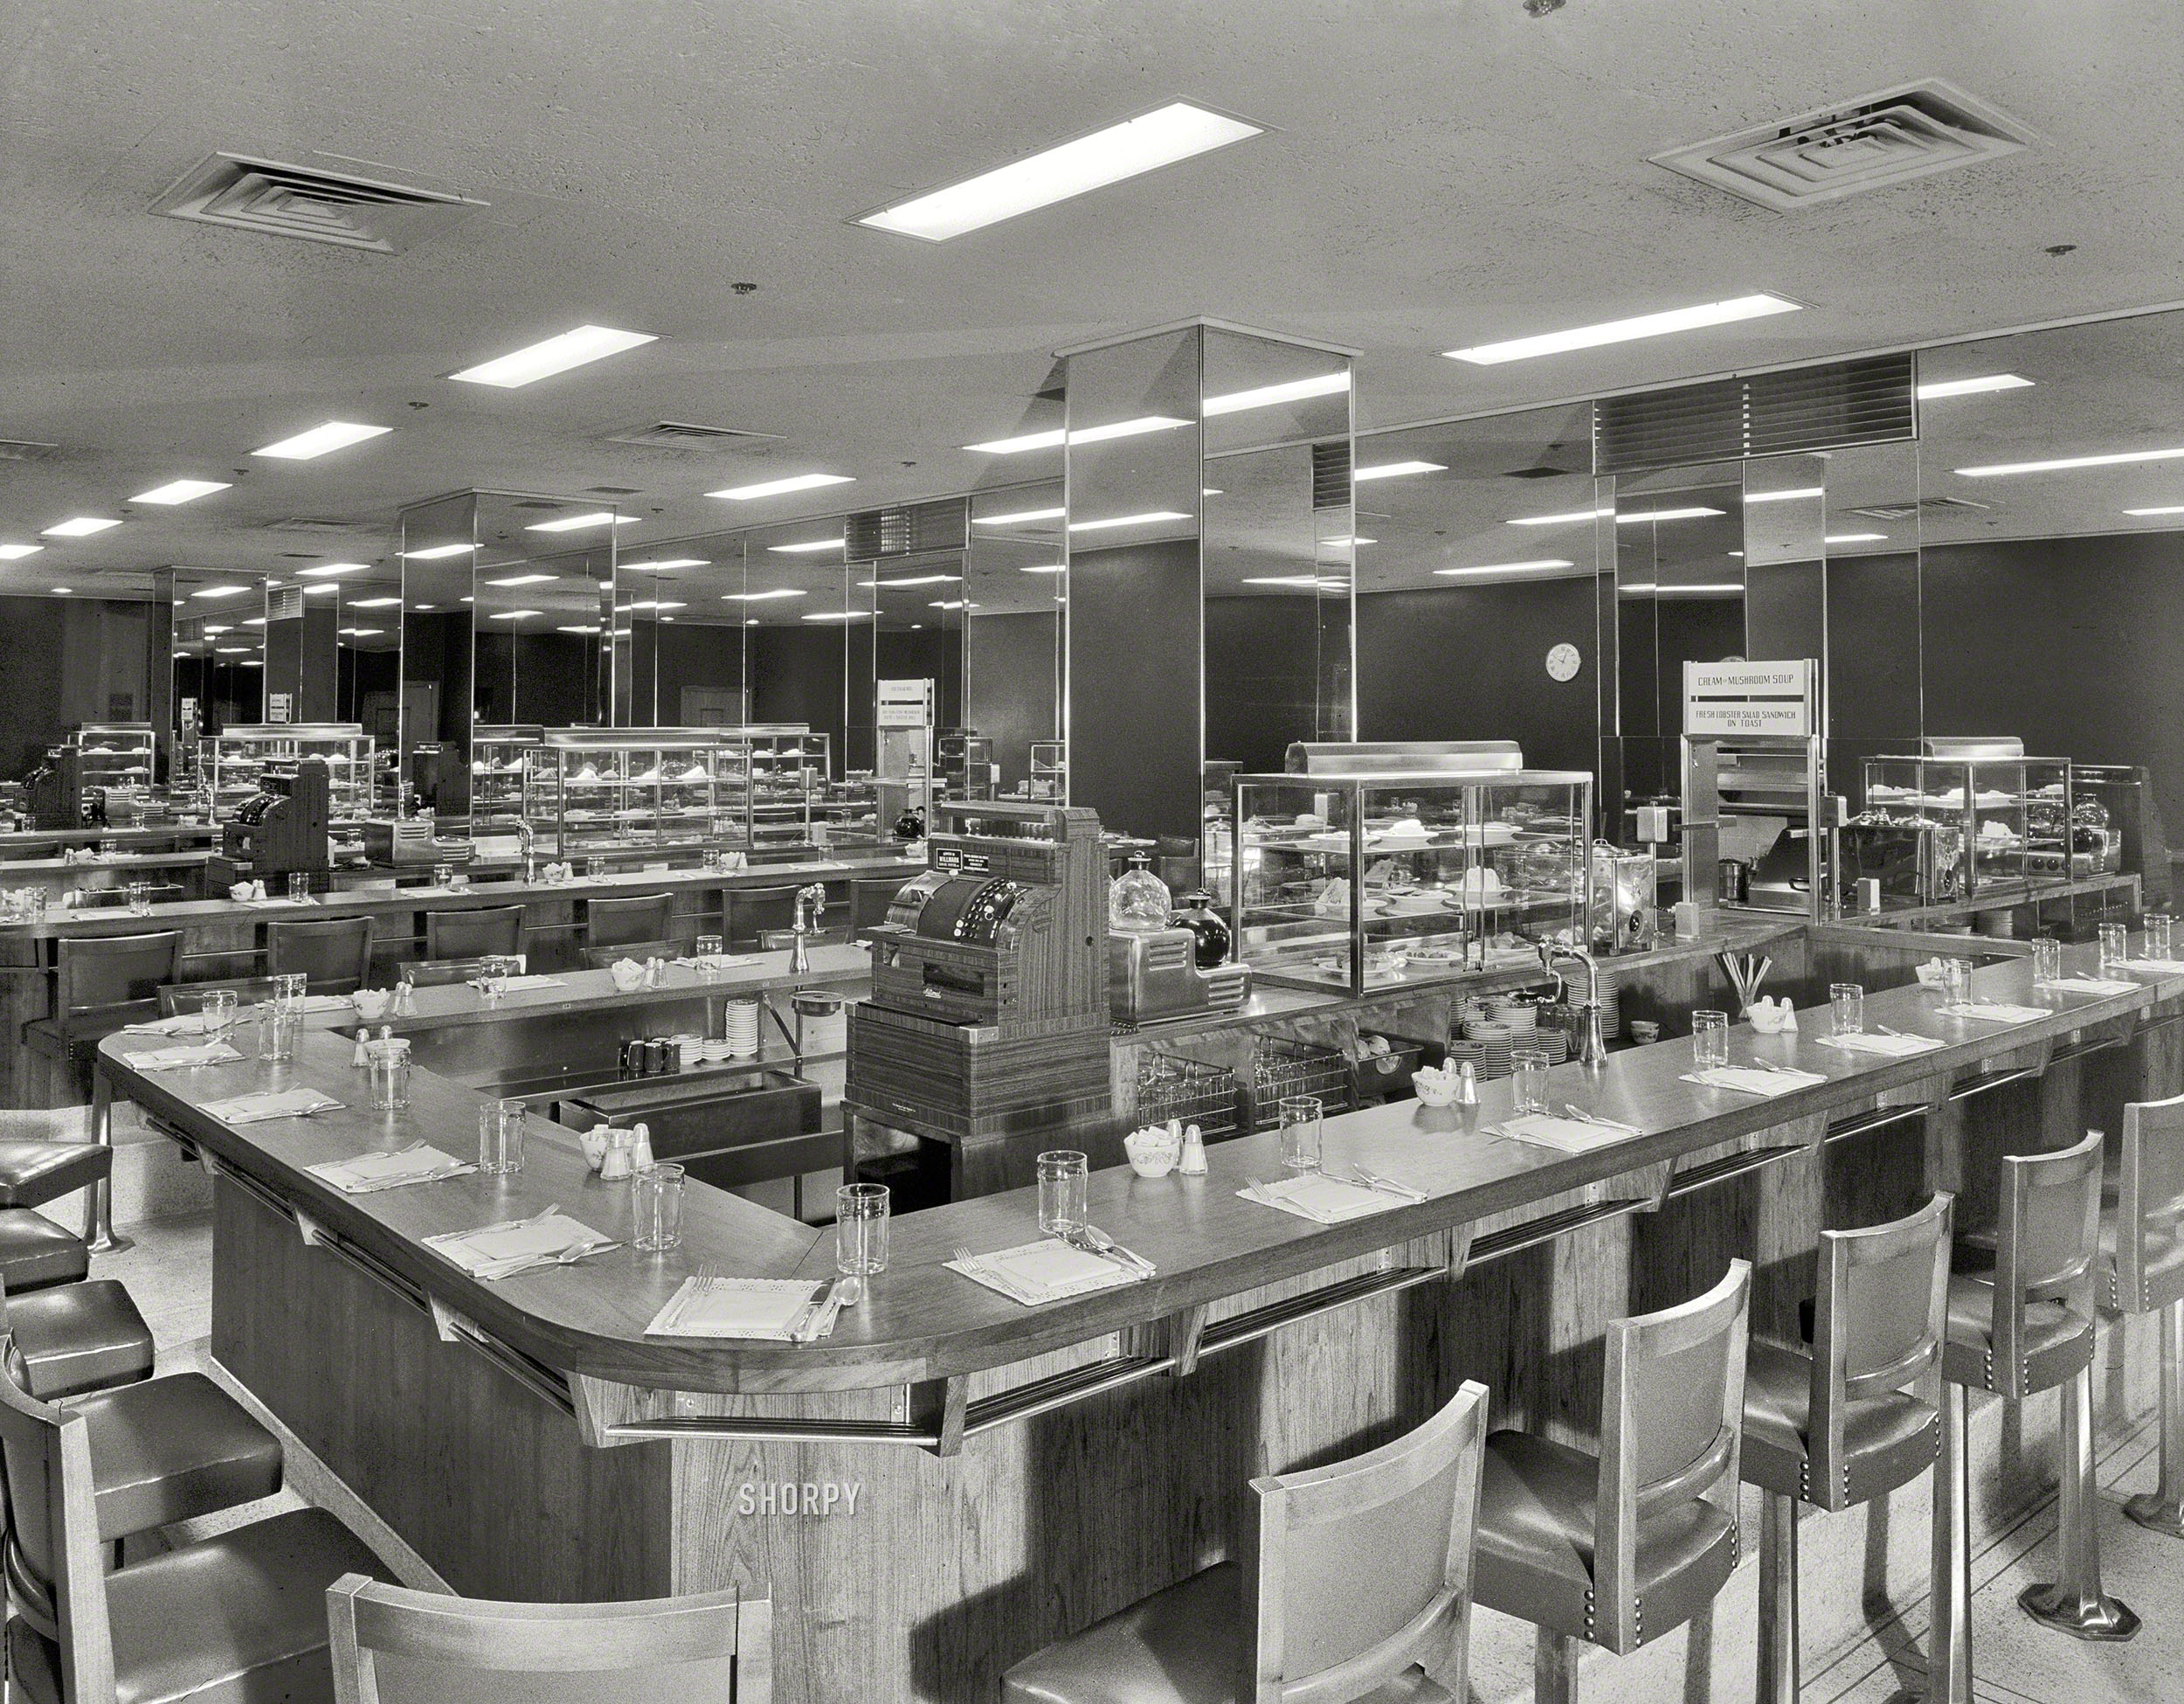 Jan. 17, 1953. New York. "Schrafft's, New Chrysler Building. Interior IV." Highly developed example of a genre of eatery once known as "quick service lunch," now more generally called "fast food." Gottscho-Schleisner photo. View full size.